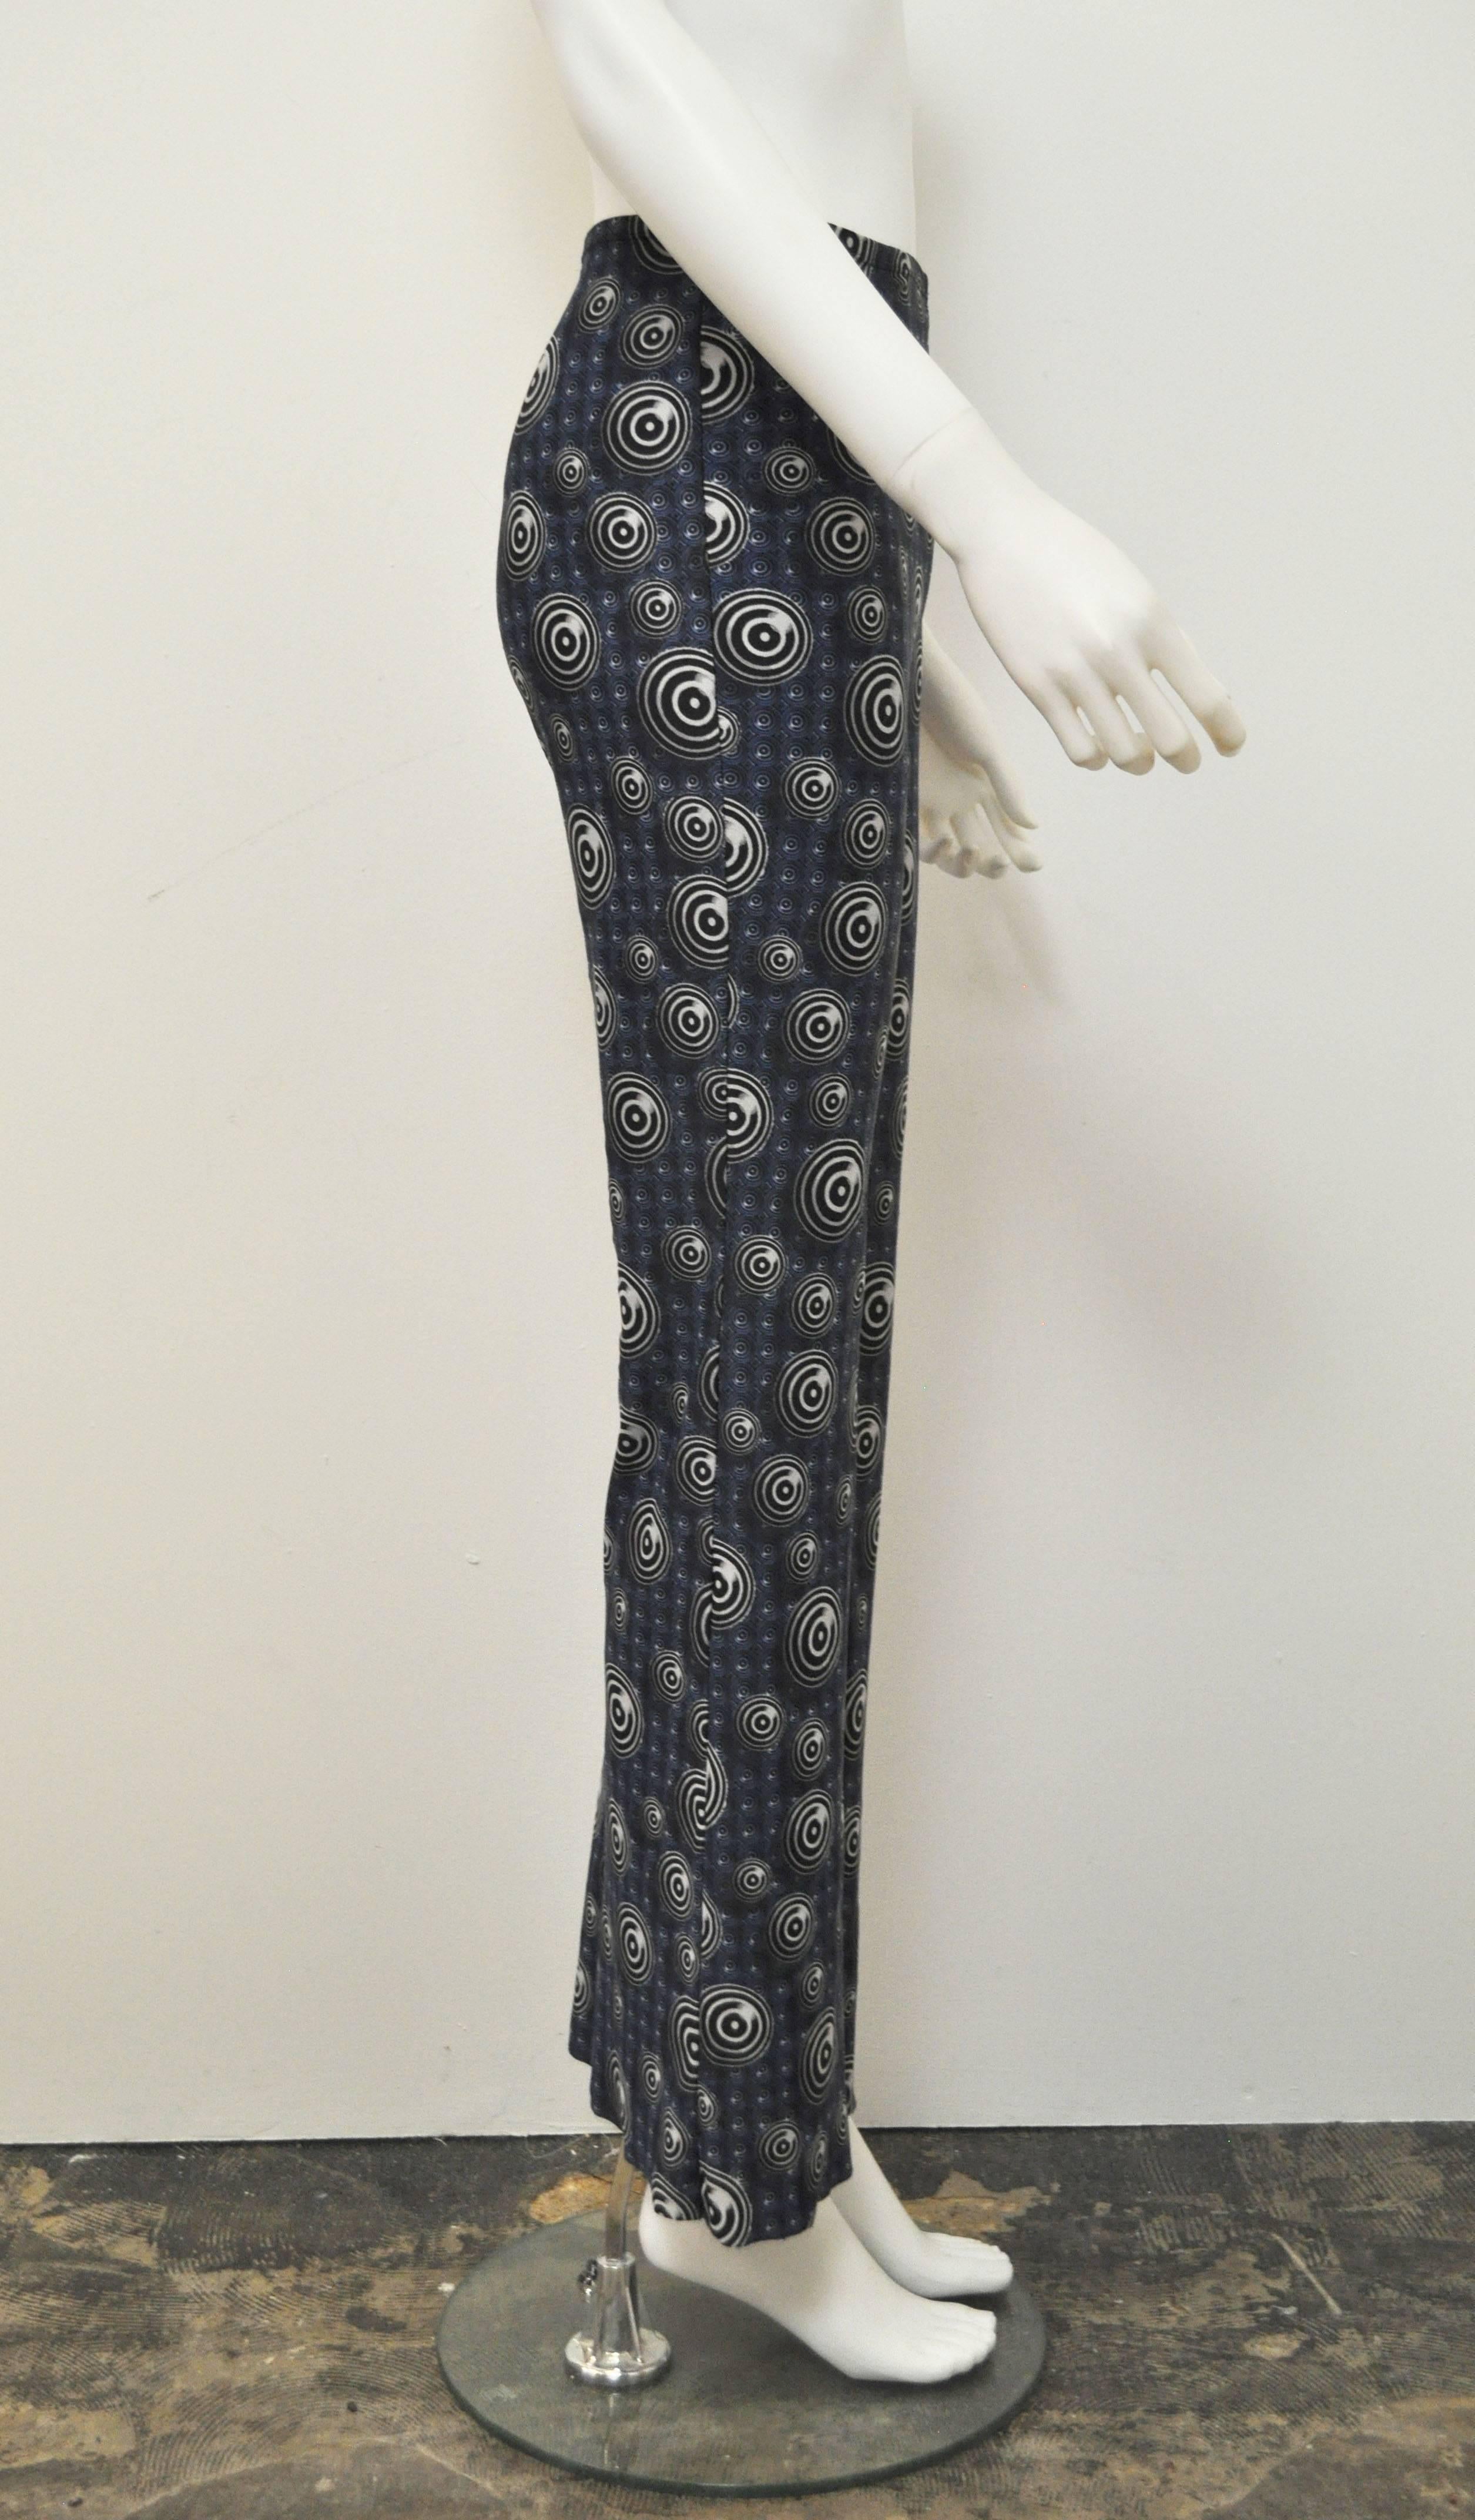 These flared printed trousers date back to the mid 1990.s The jersey trousers are fitted to the top of the leg and then flare out from the knee.The blue geometric pattern is decorated with black and white concentric circles. They feature JPG’s